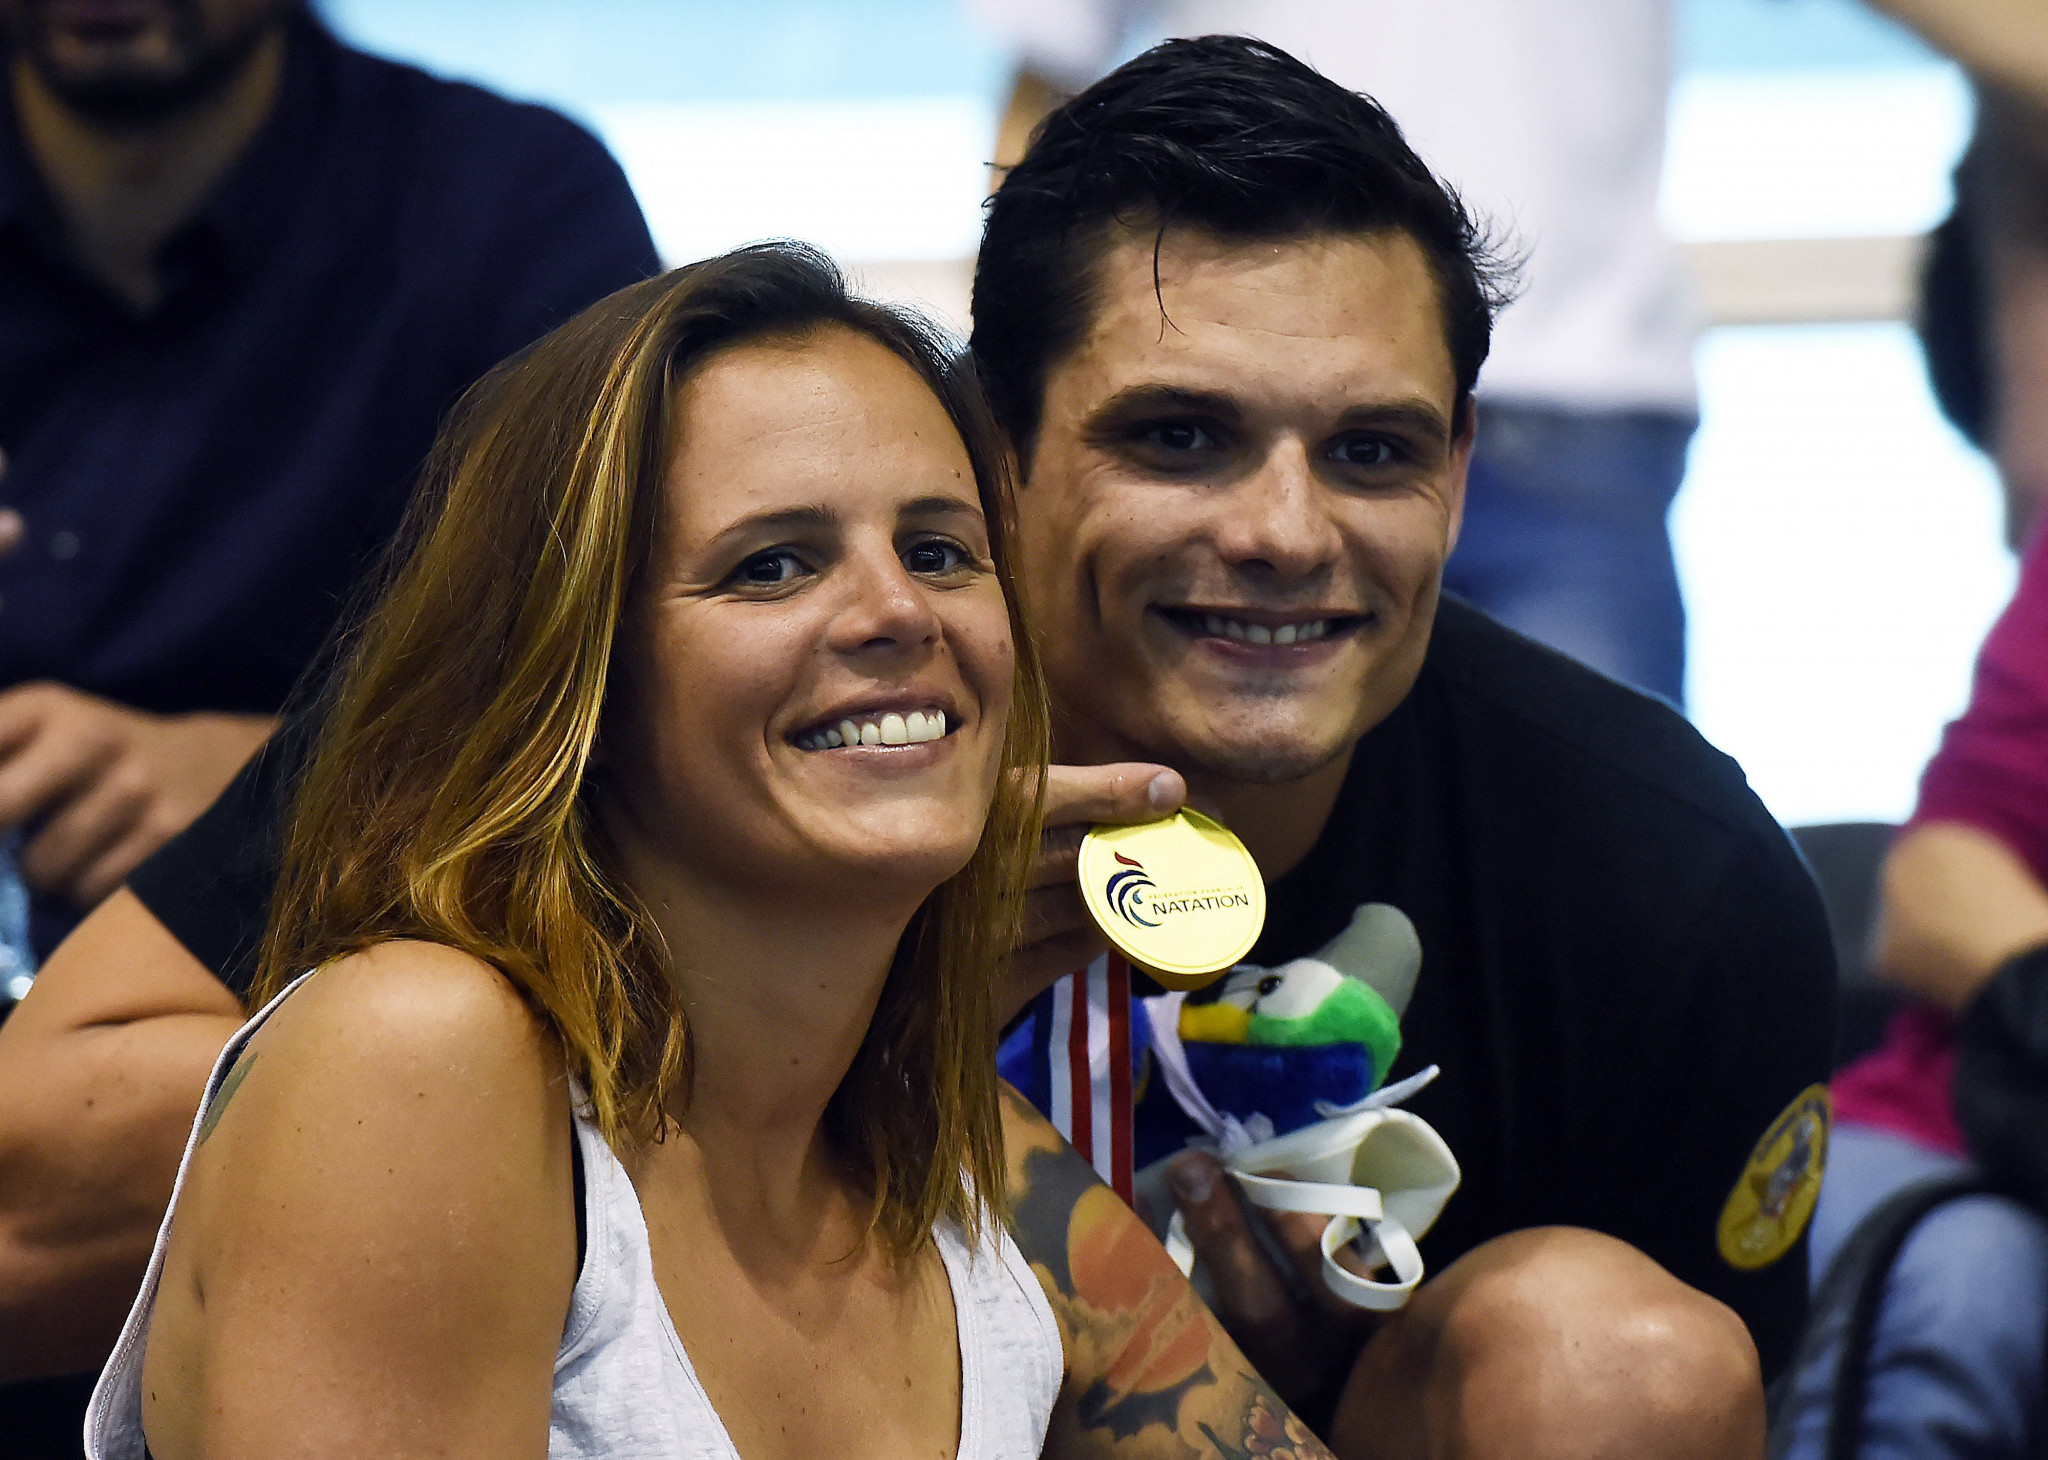 Olympic swimming champions Laure and Florent Manaudou named super ambassadors for Torch Relay